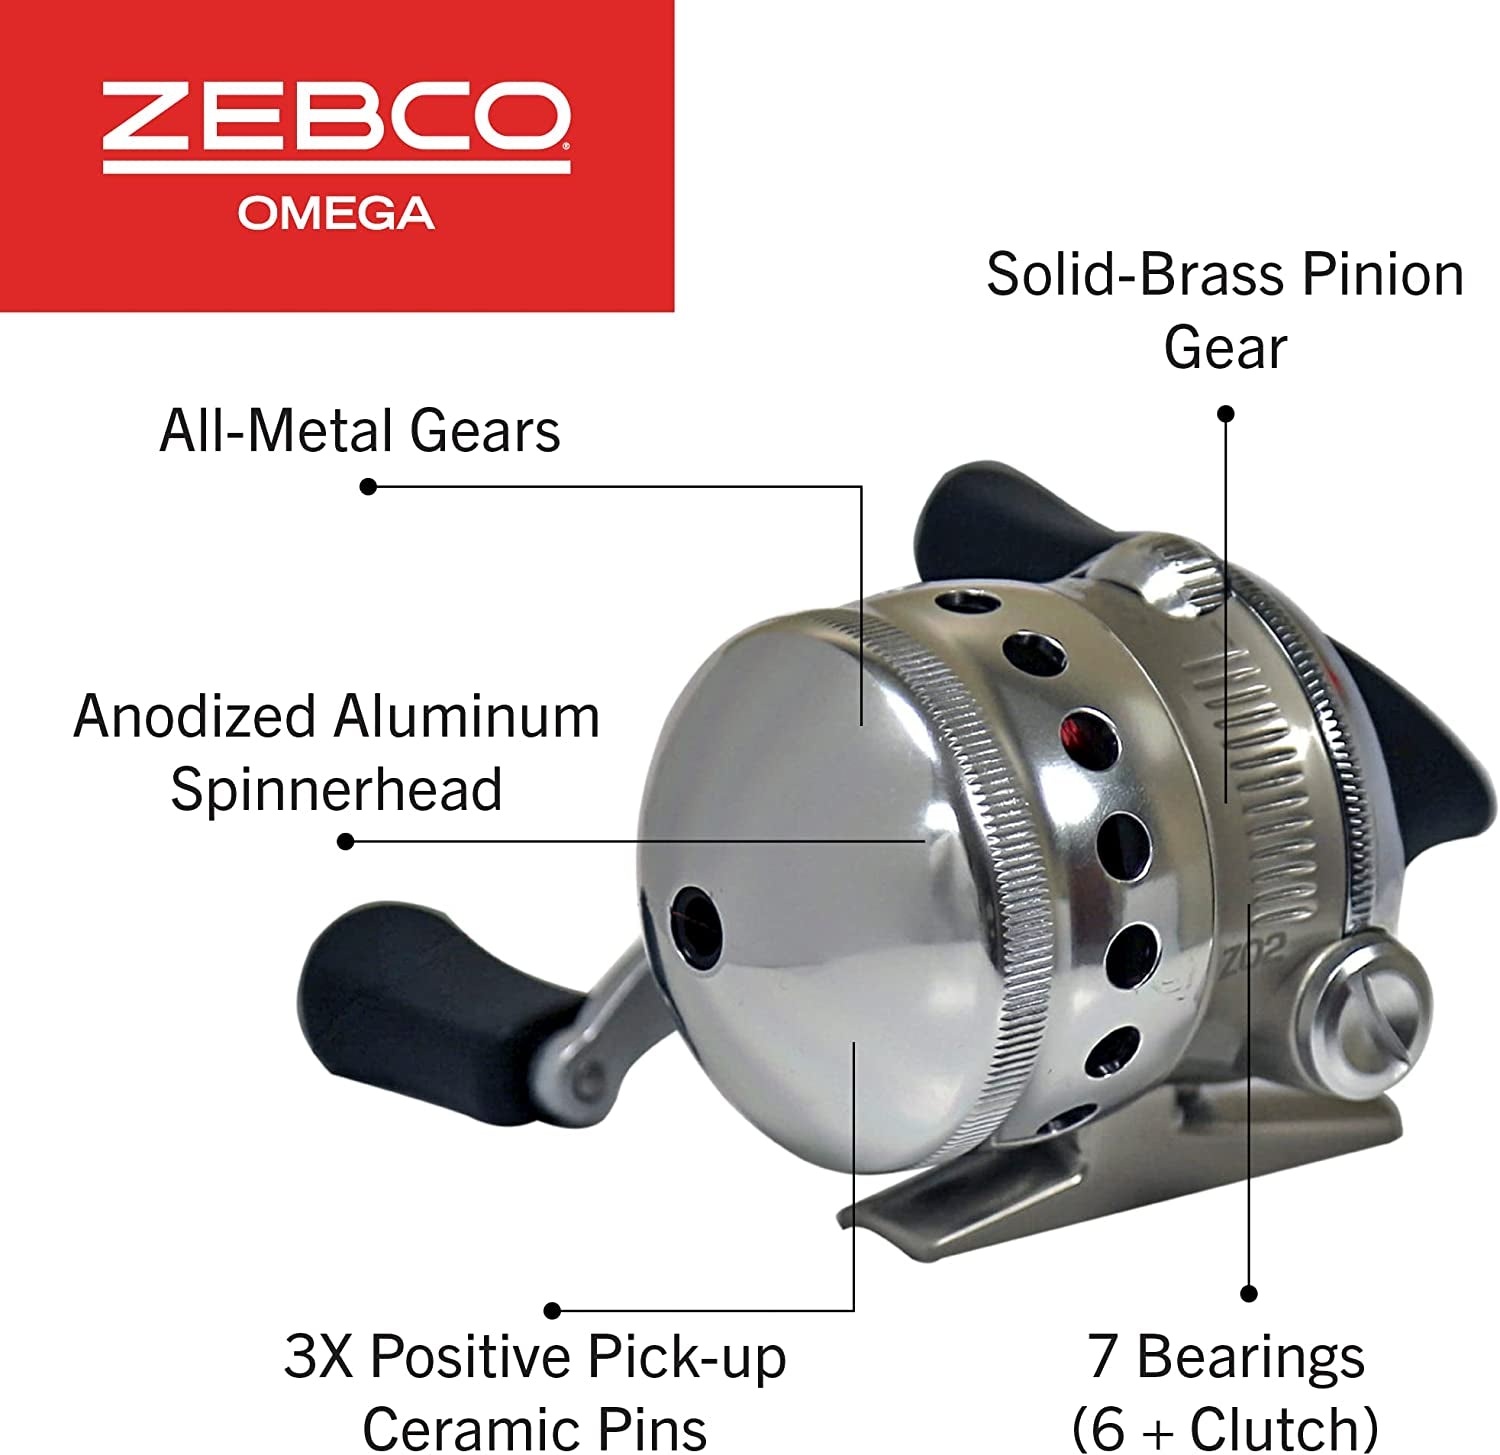 Zebco Omega Spincast Fishing Reel, 7 Bearings (6 + Clutch), Instant Anti-Reverse with a Smooth Dial-Adjustable Drag, Powerful All-Metal Gears and Spare Spool